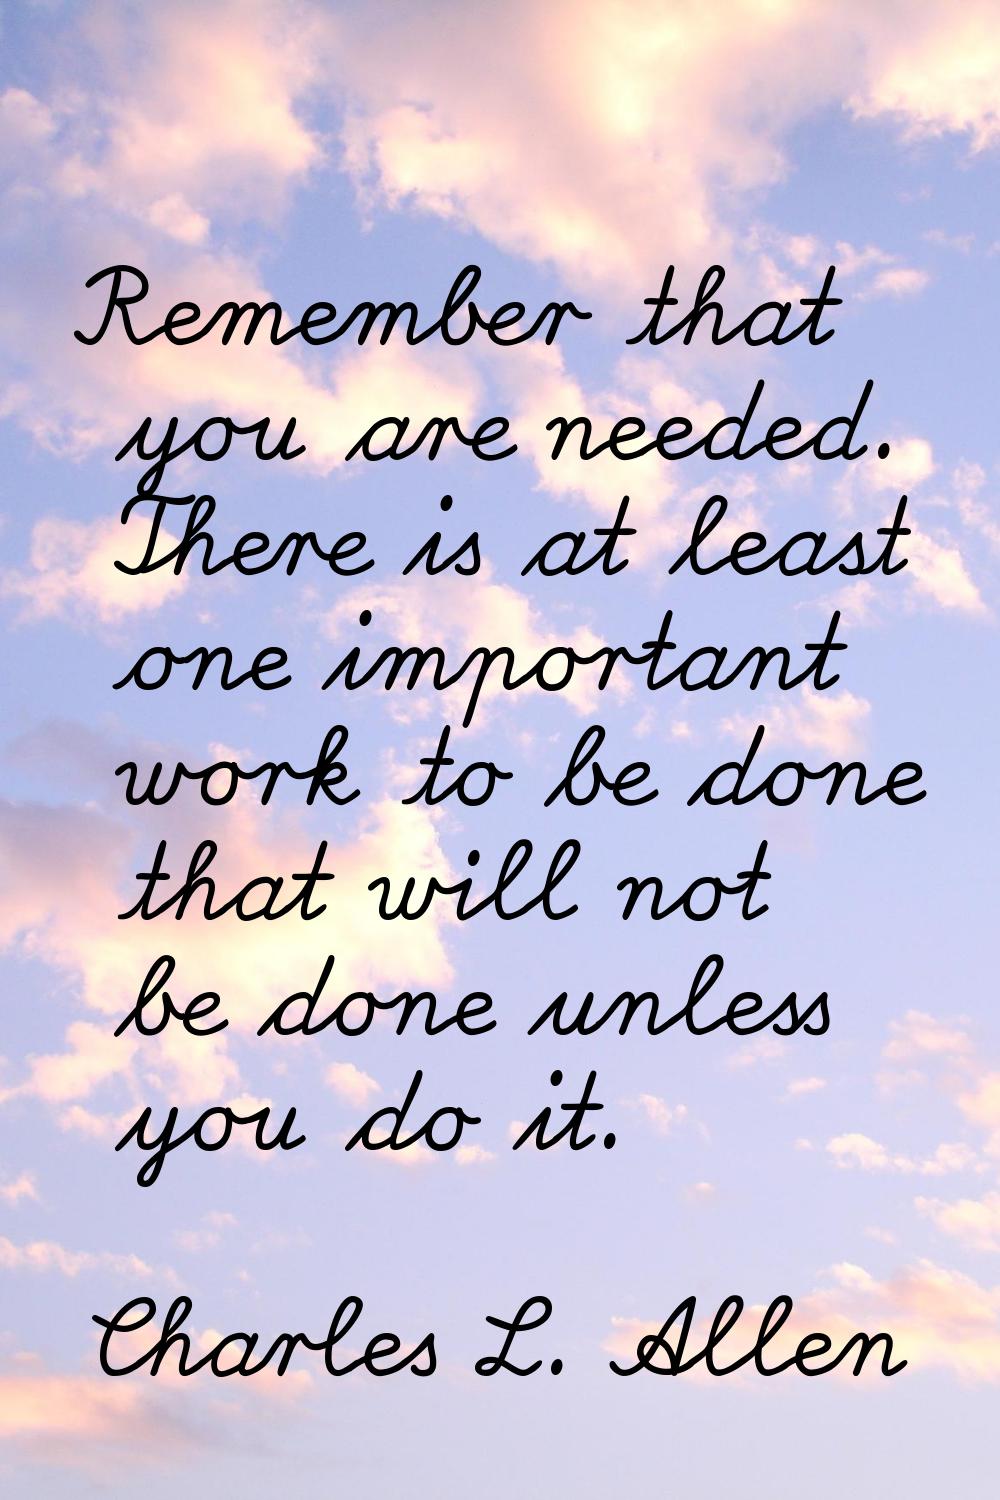 Remember that you are needed. There is at least one important work to be done that will not be done